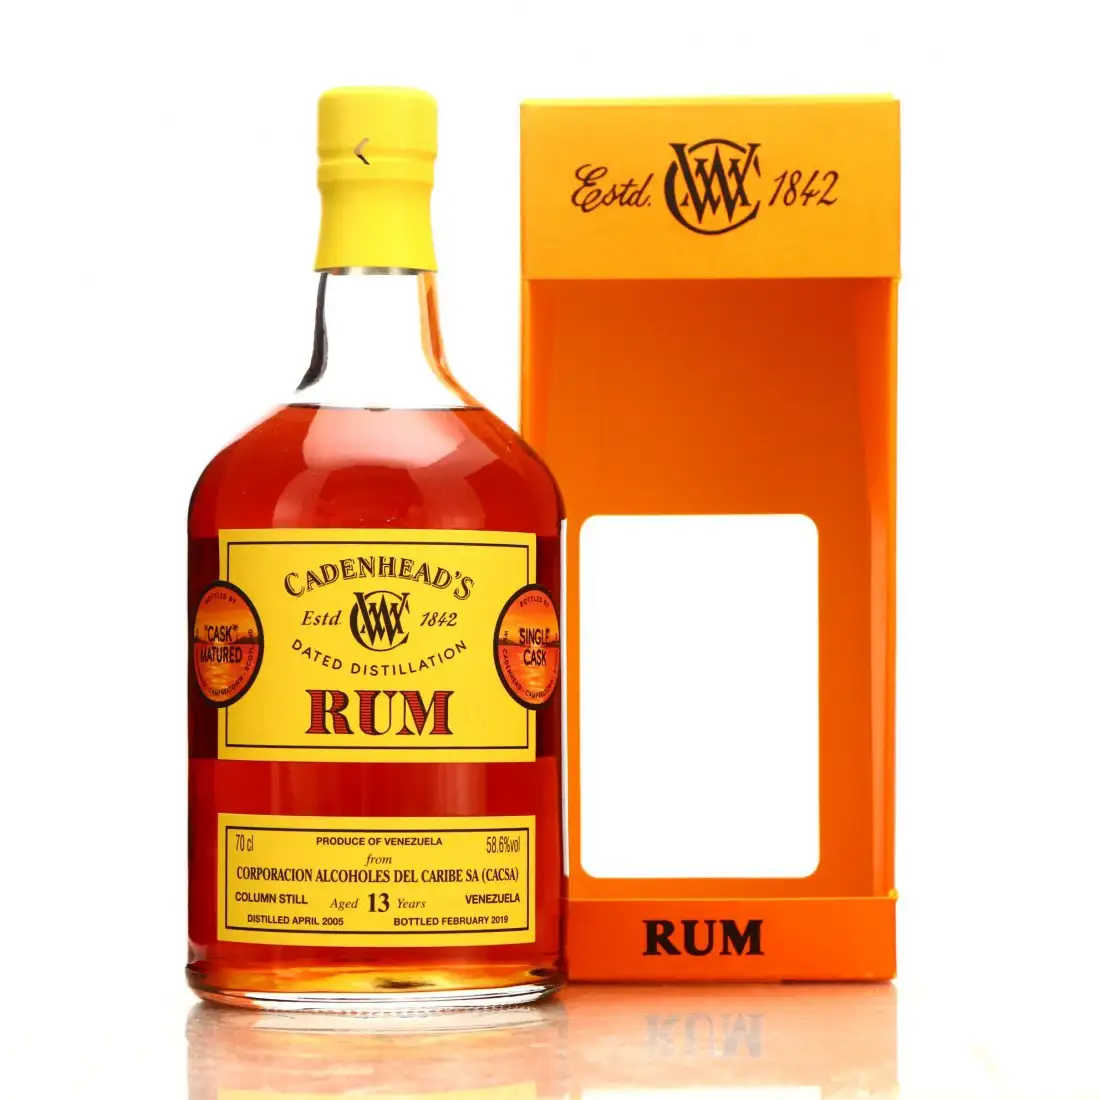 Image of the front of the bottle of the rum Venezuela